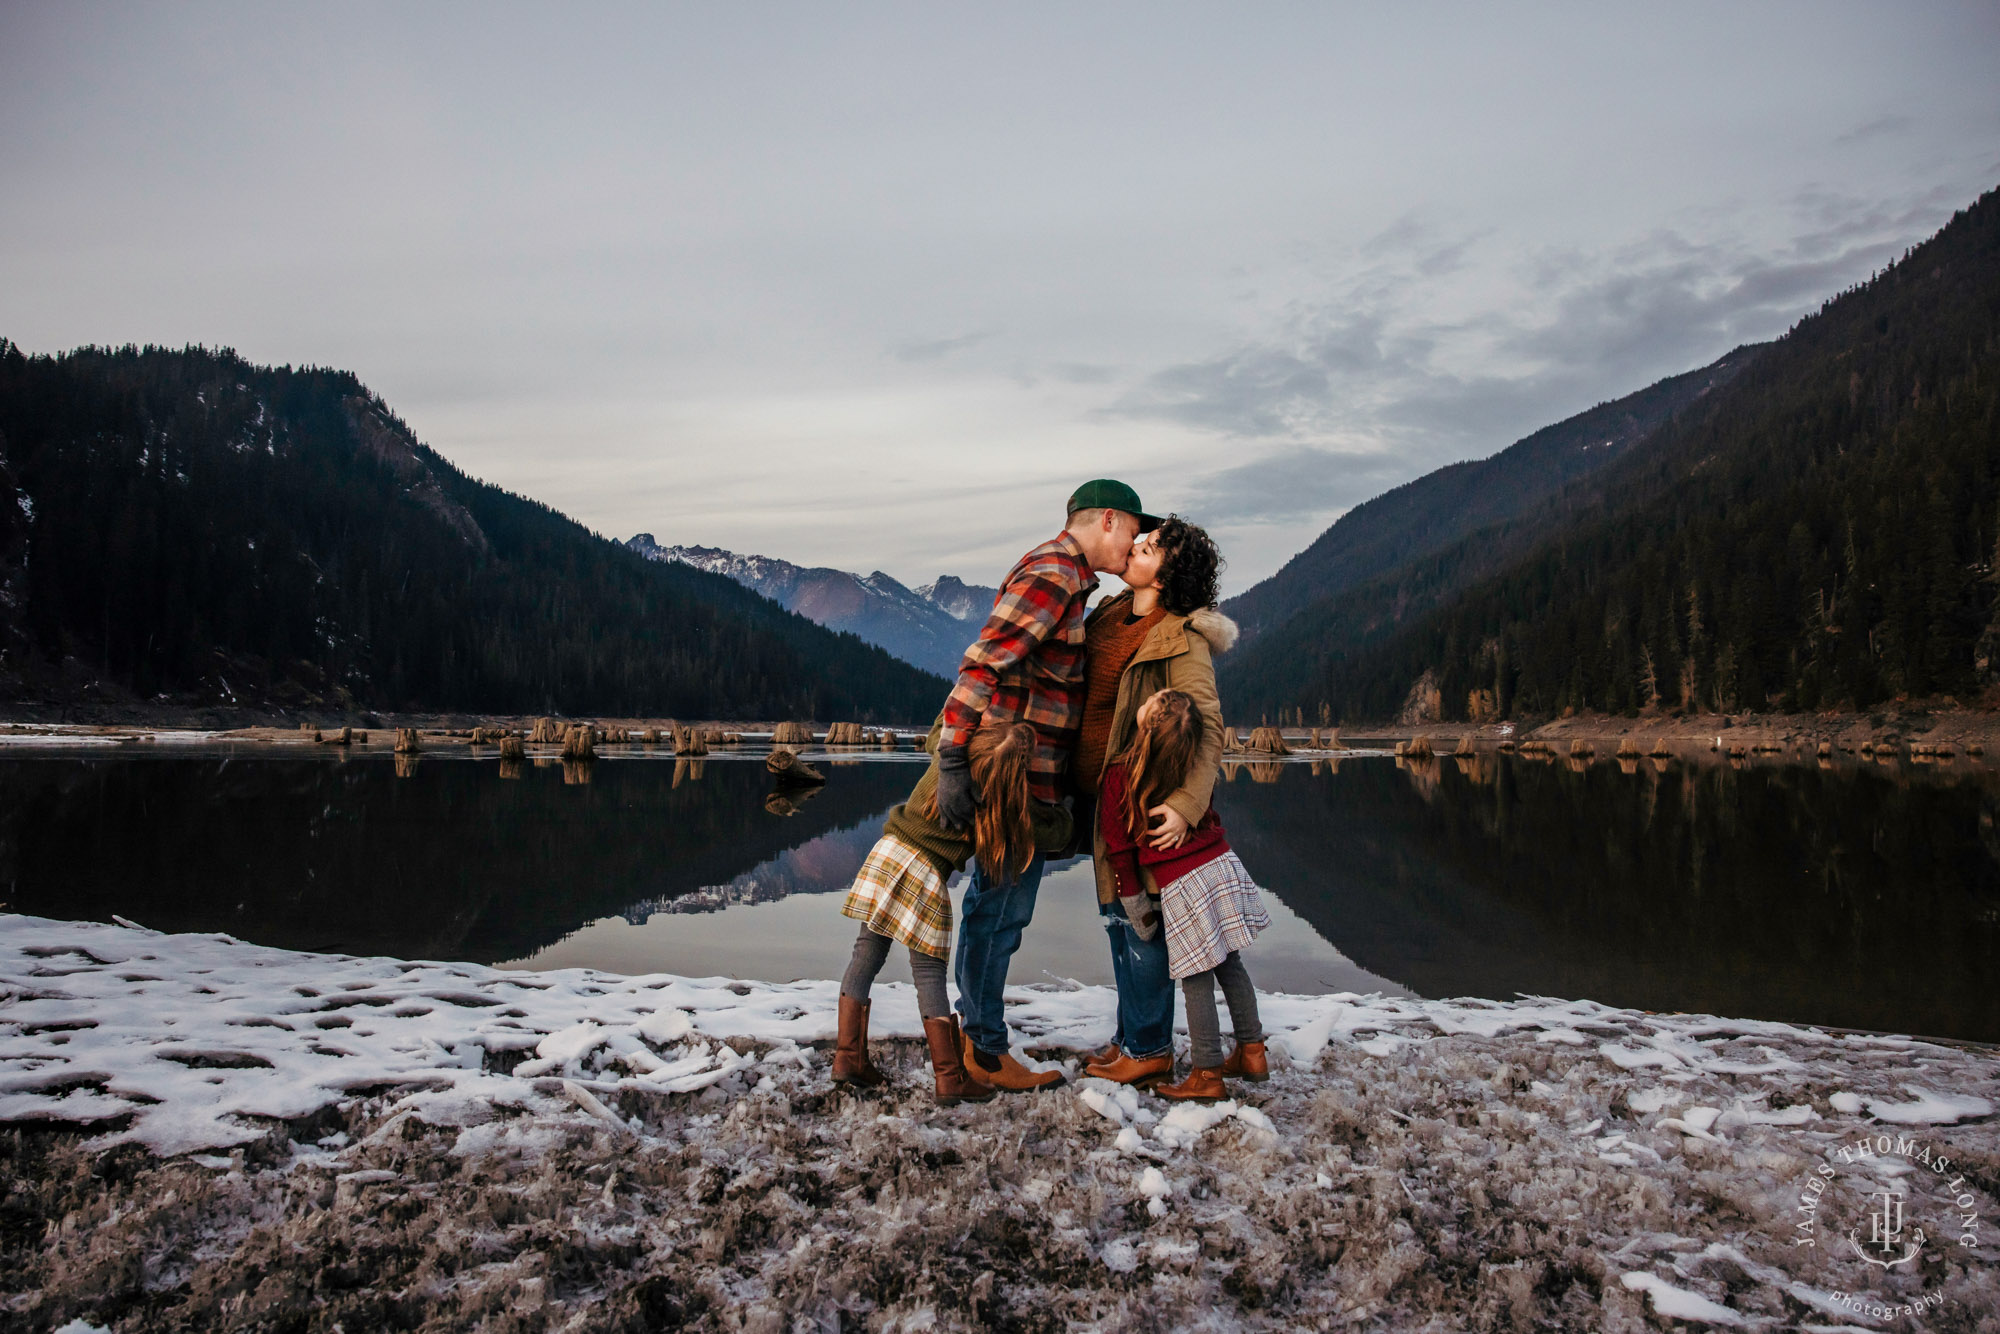 Adventure family photography session in the Cascade Mountains by Snoqualmie adventure family photographer James Thomas Long Photography